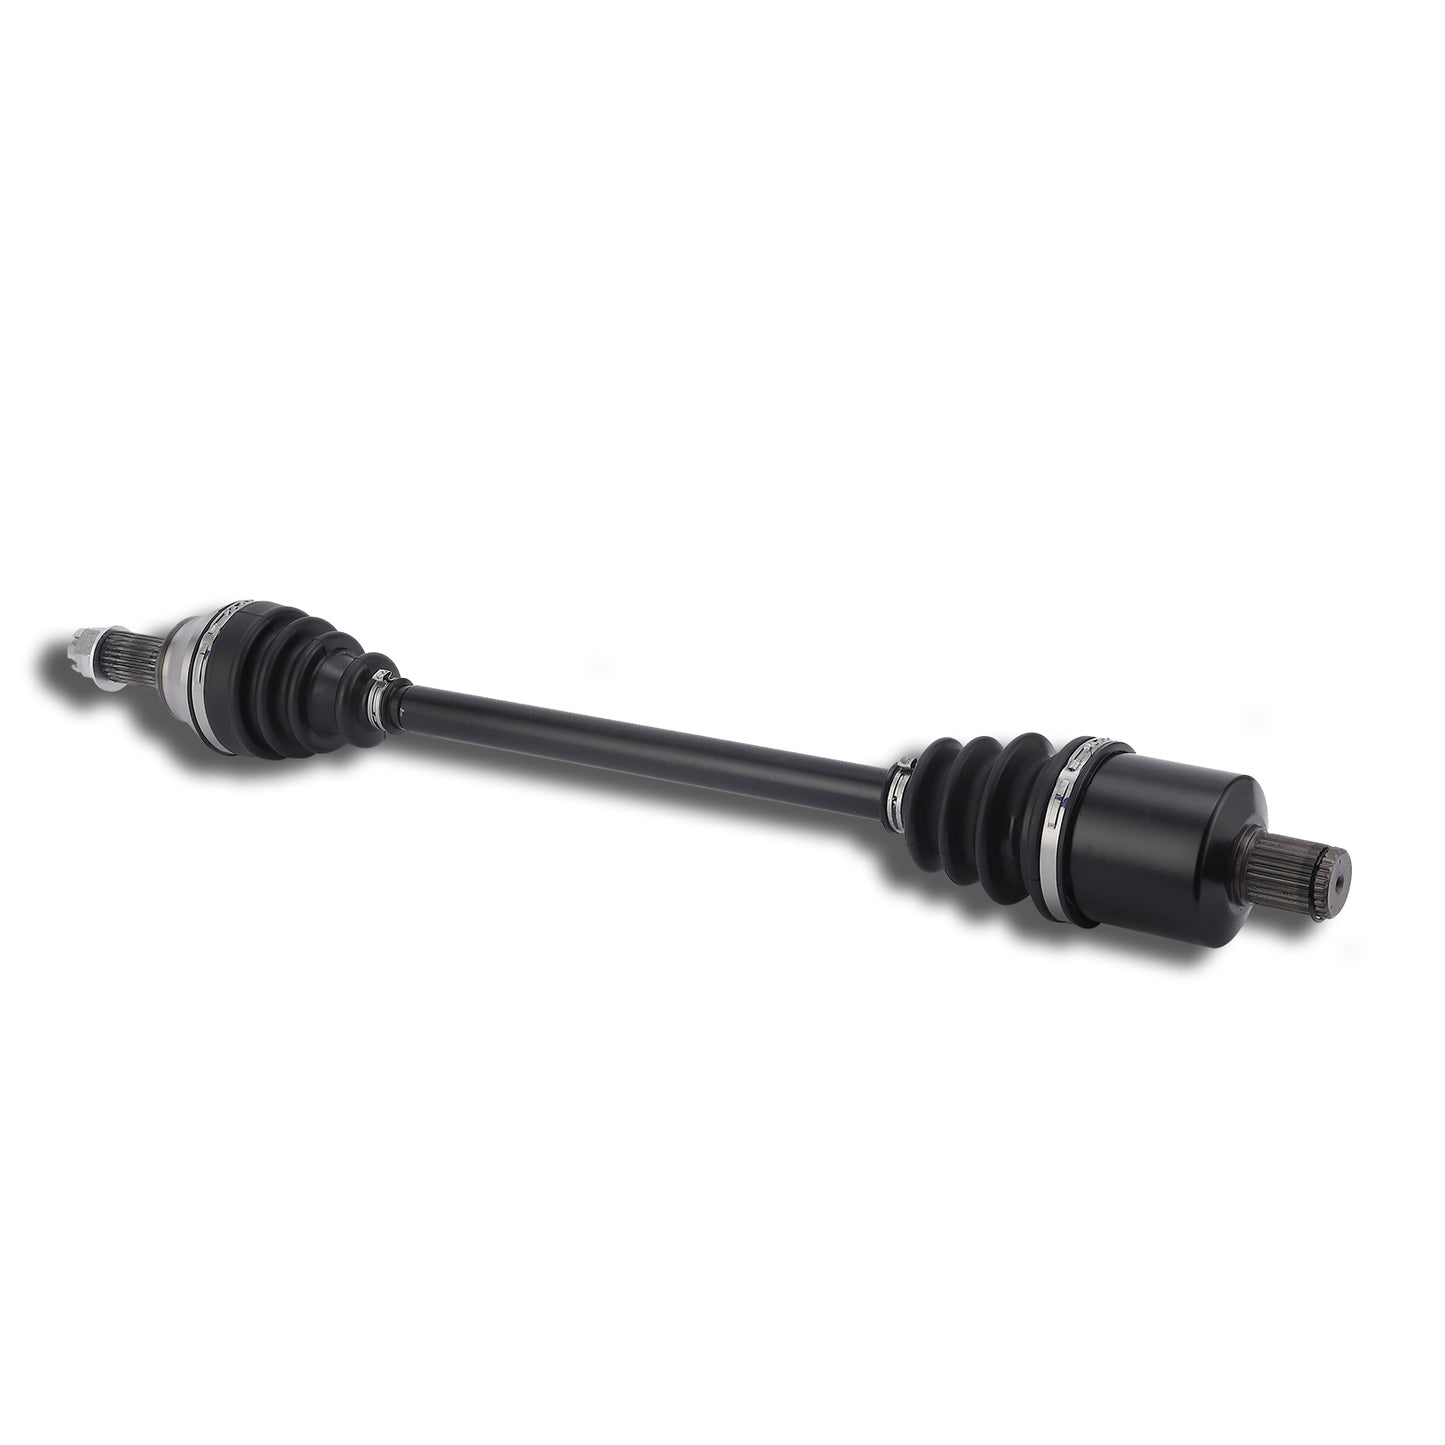 2 CAM-PO701 Front Left Drive Shaft CV Axle Compatible with POLARIS (2021) Ranger 1000 BF 1334351